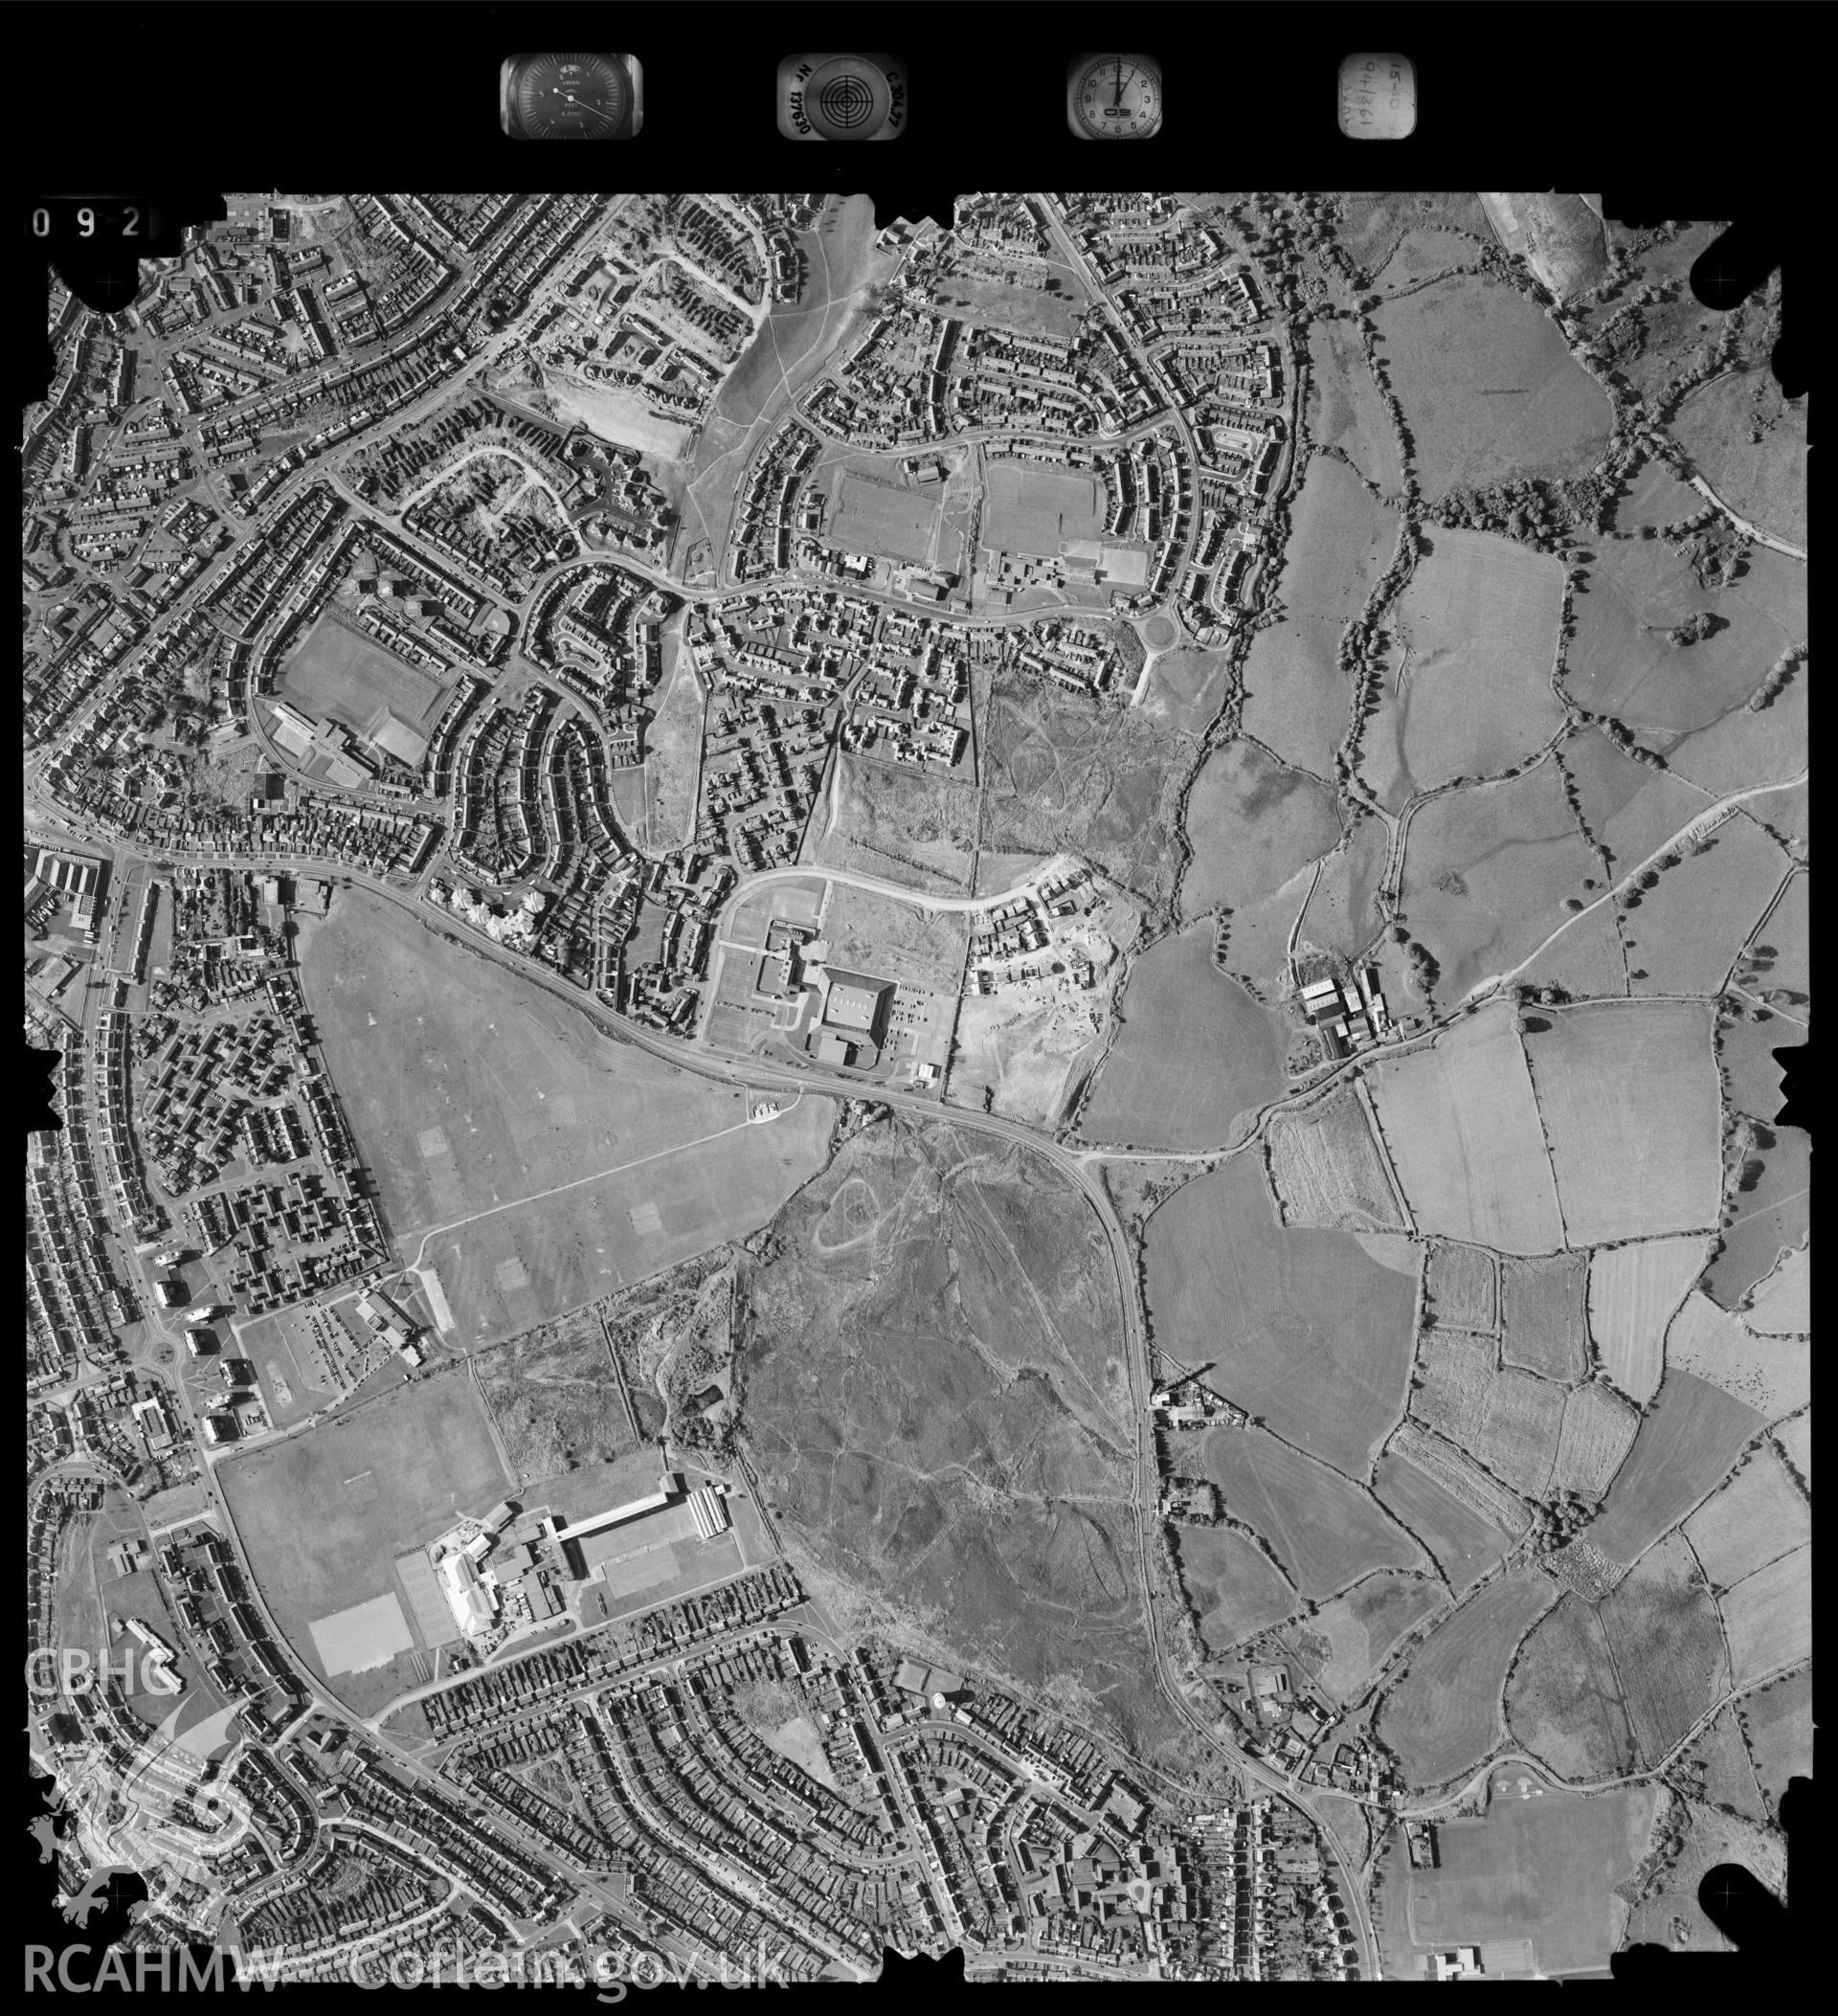 Digitized copy of an aerial photograph showing the Winsh-wen area of Swansea, taken by Ordnance Survey, 1994.